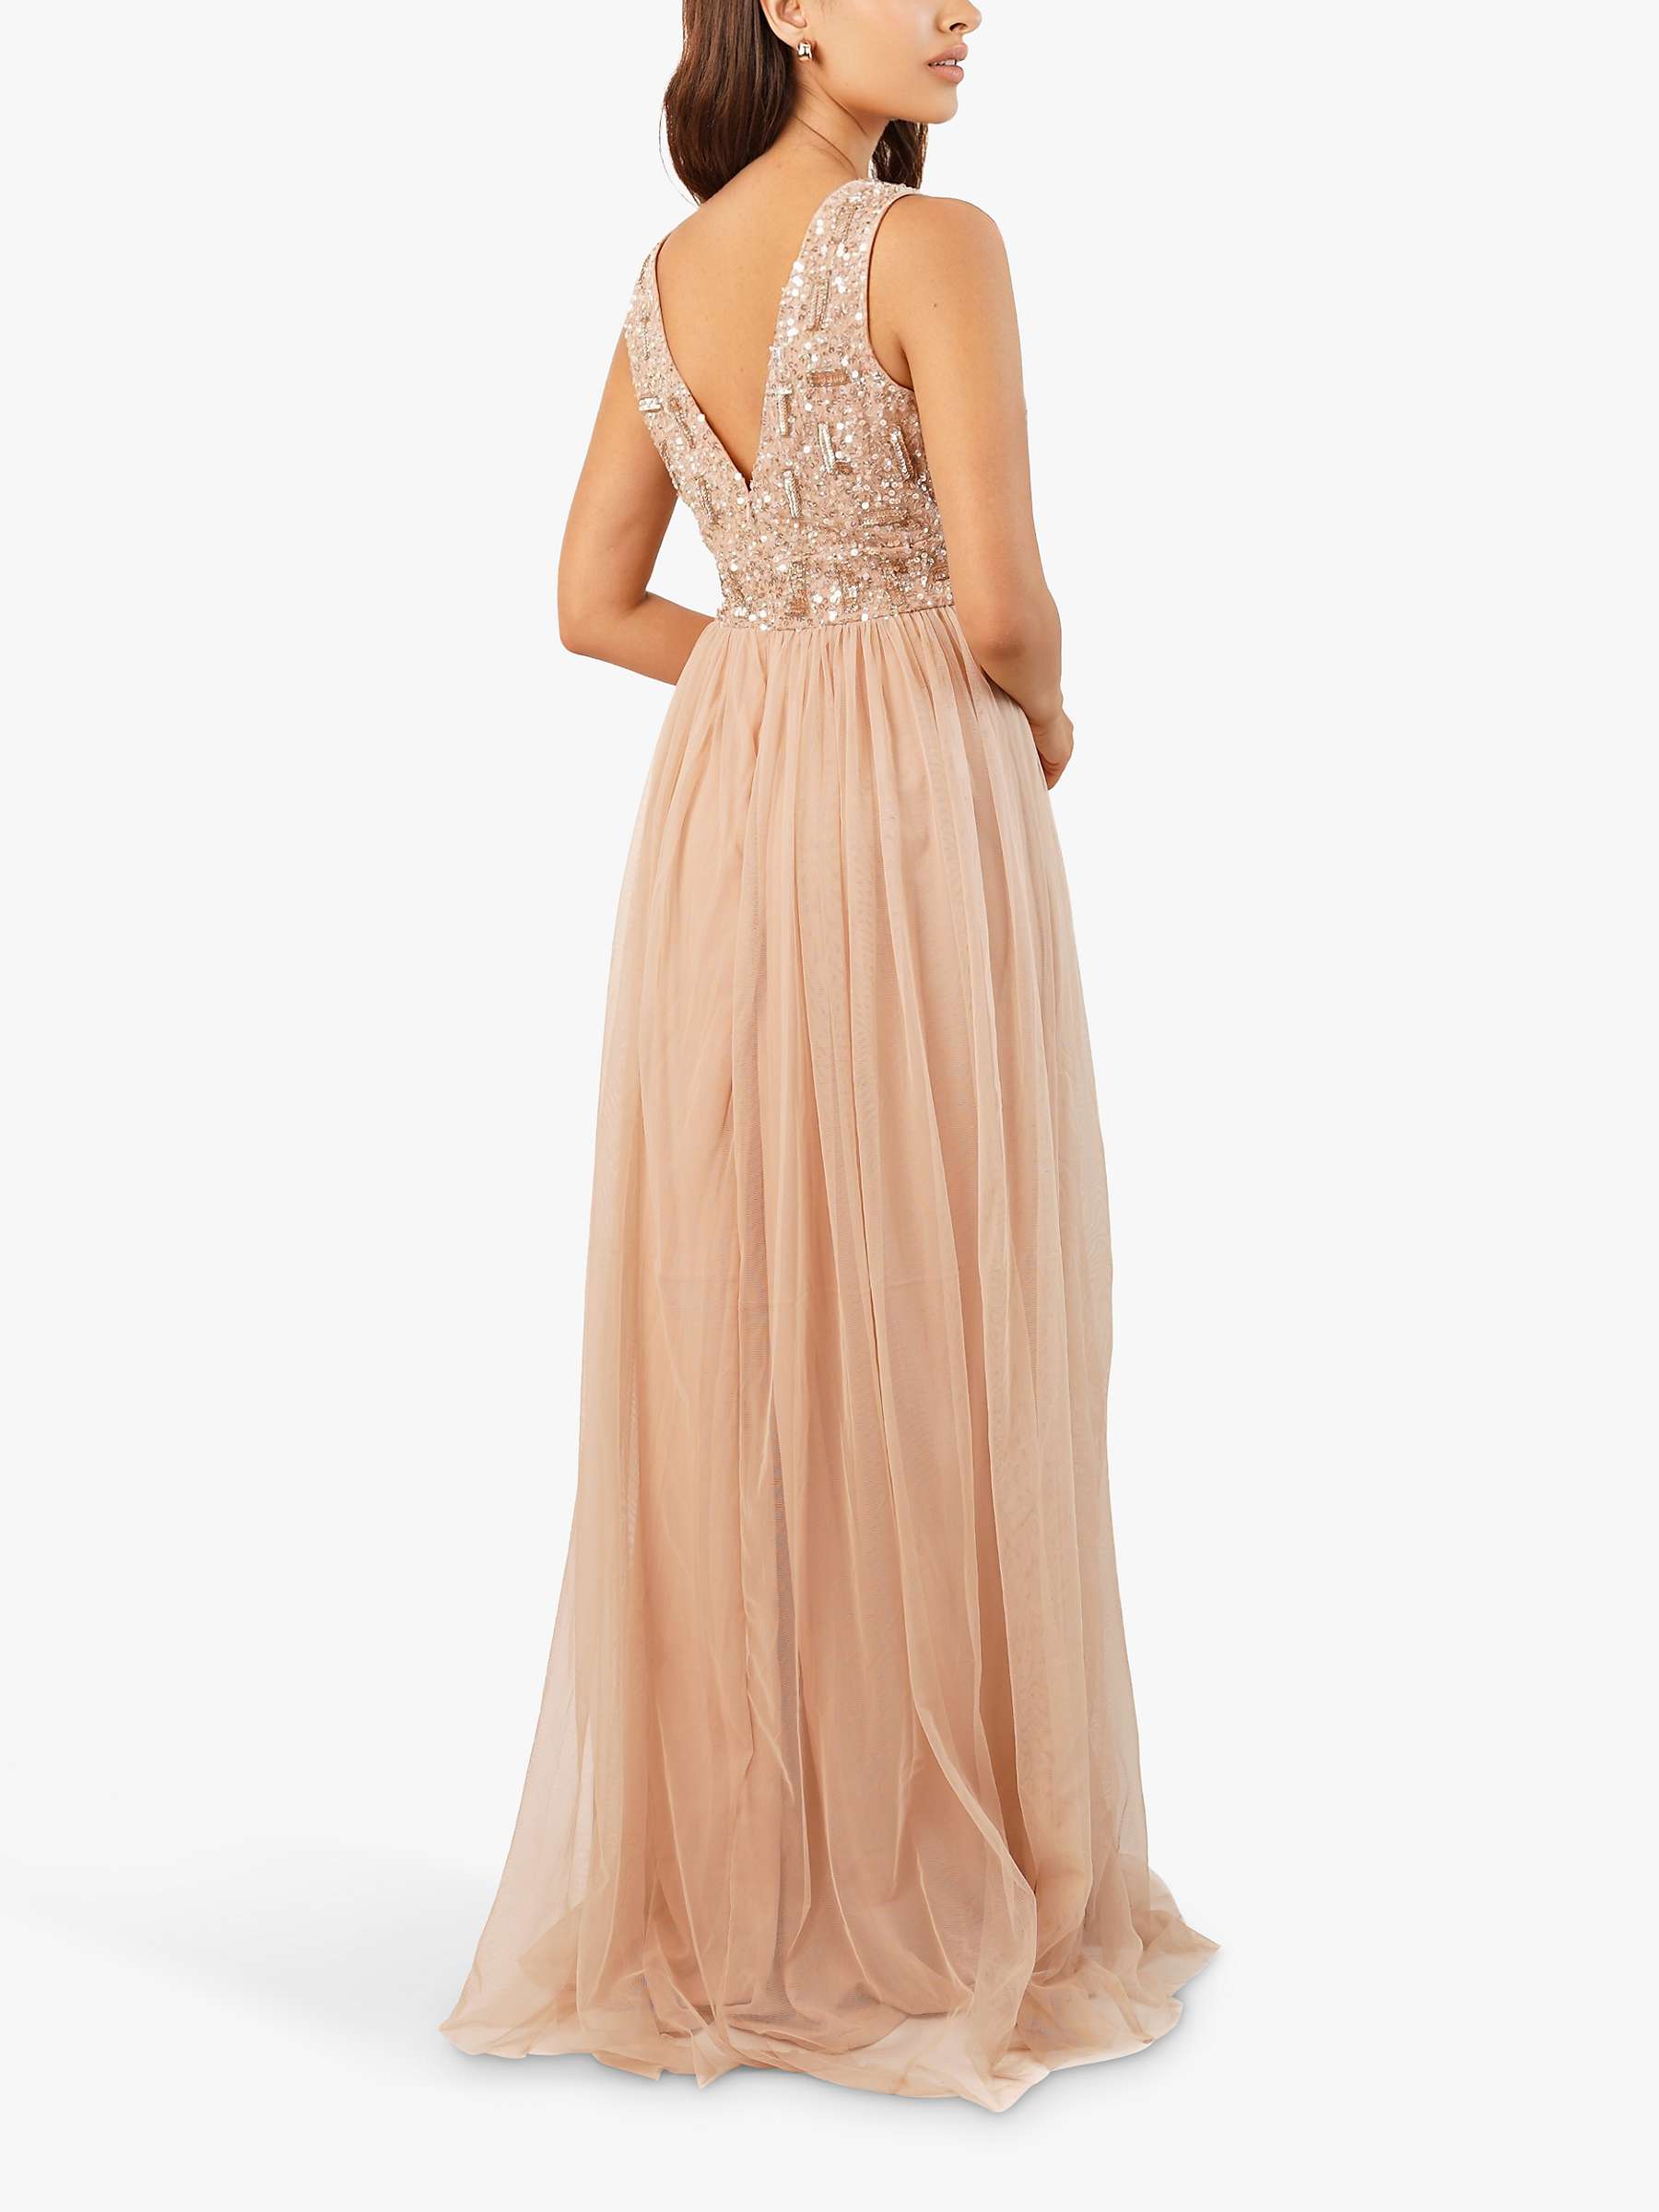 Buy Lace & Beads Aurora Embellished Layered Mesh Maxi Dress, Nude Online at johnlewis.com